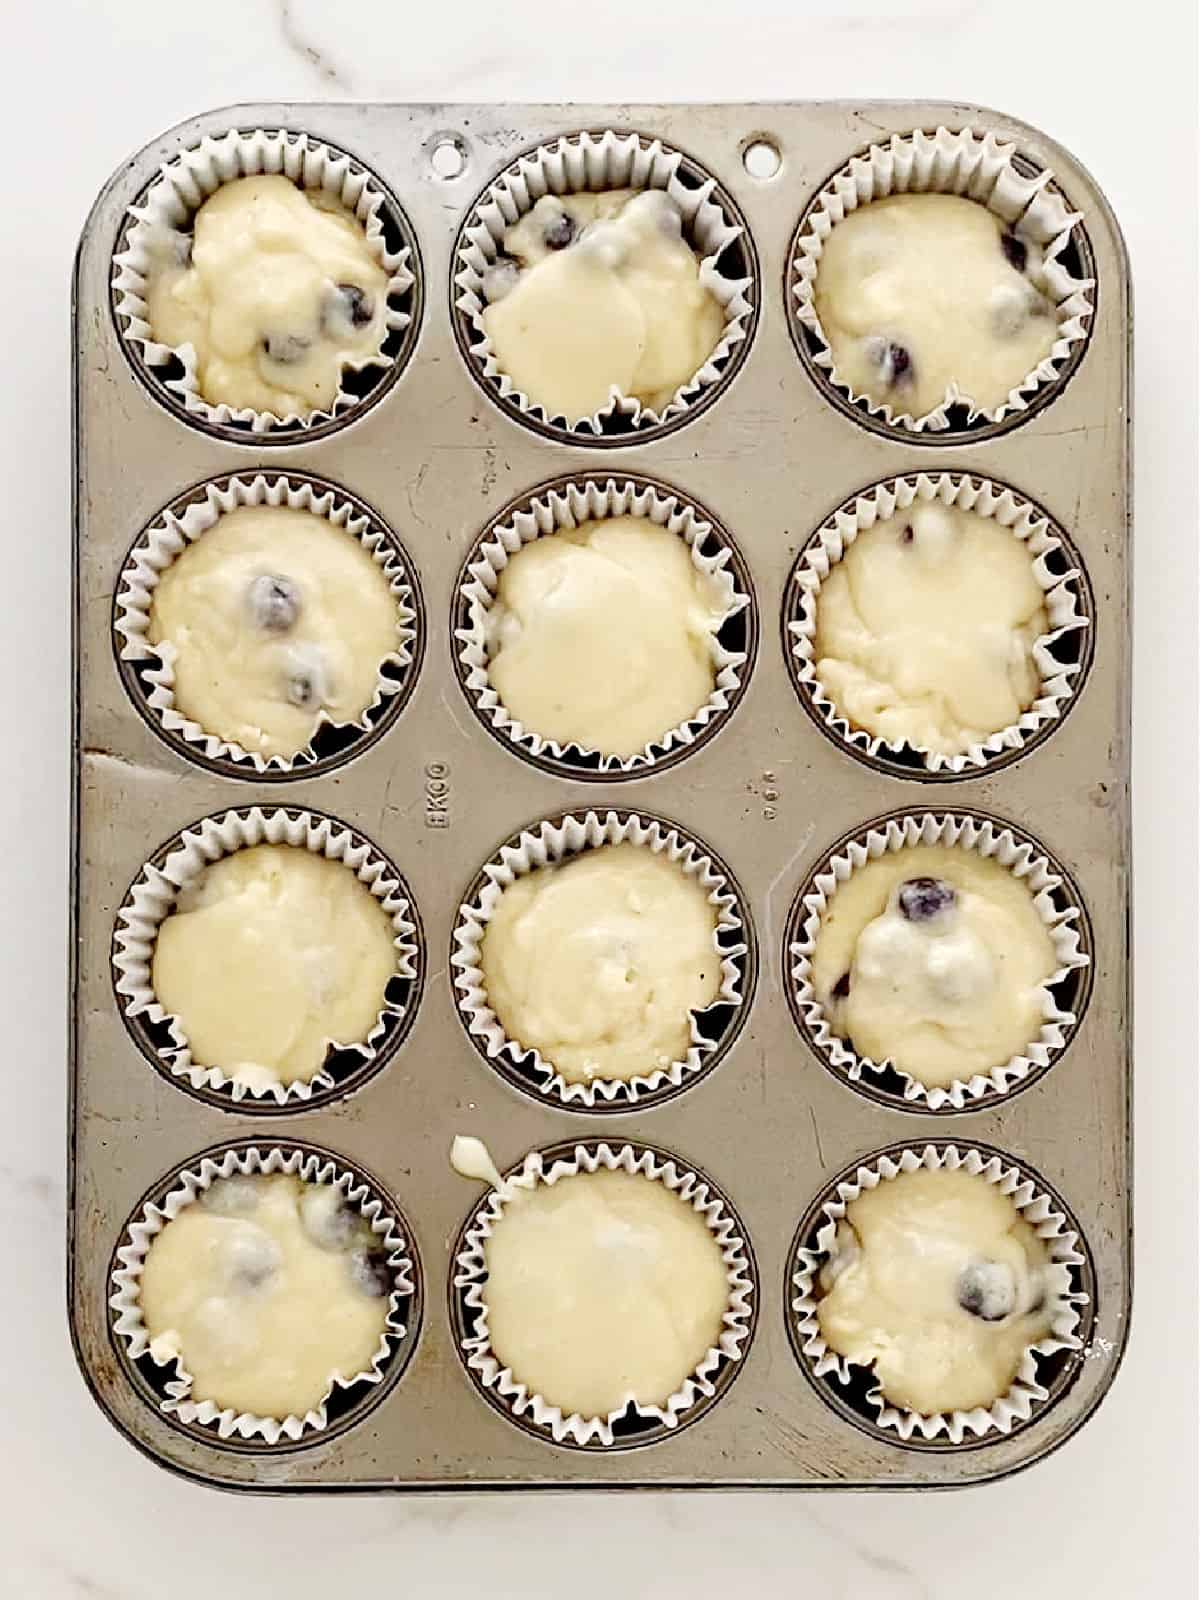 Muffin pan with blueberry muffin batter in paper liners. White marble surface.